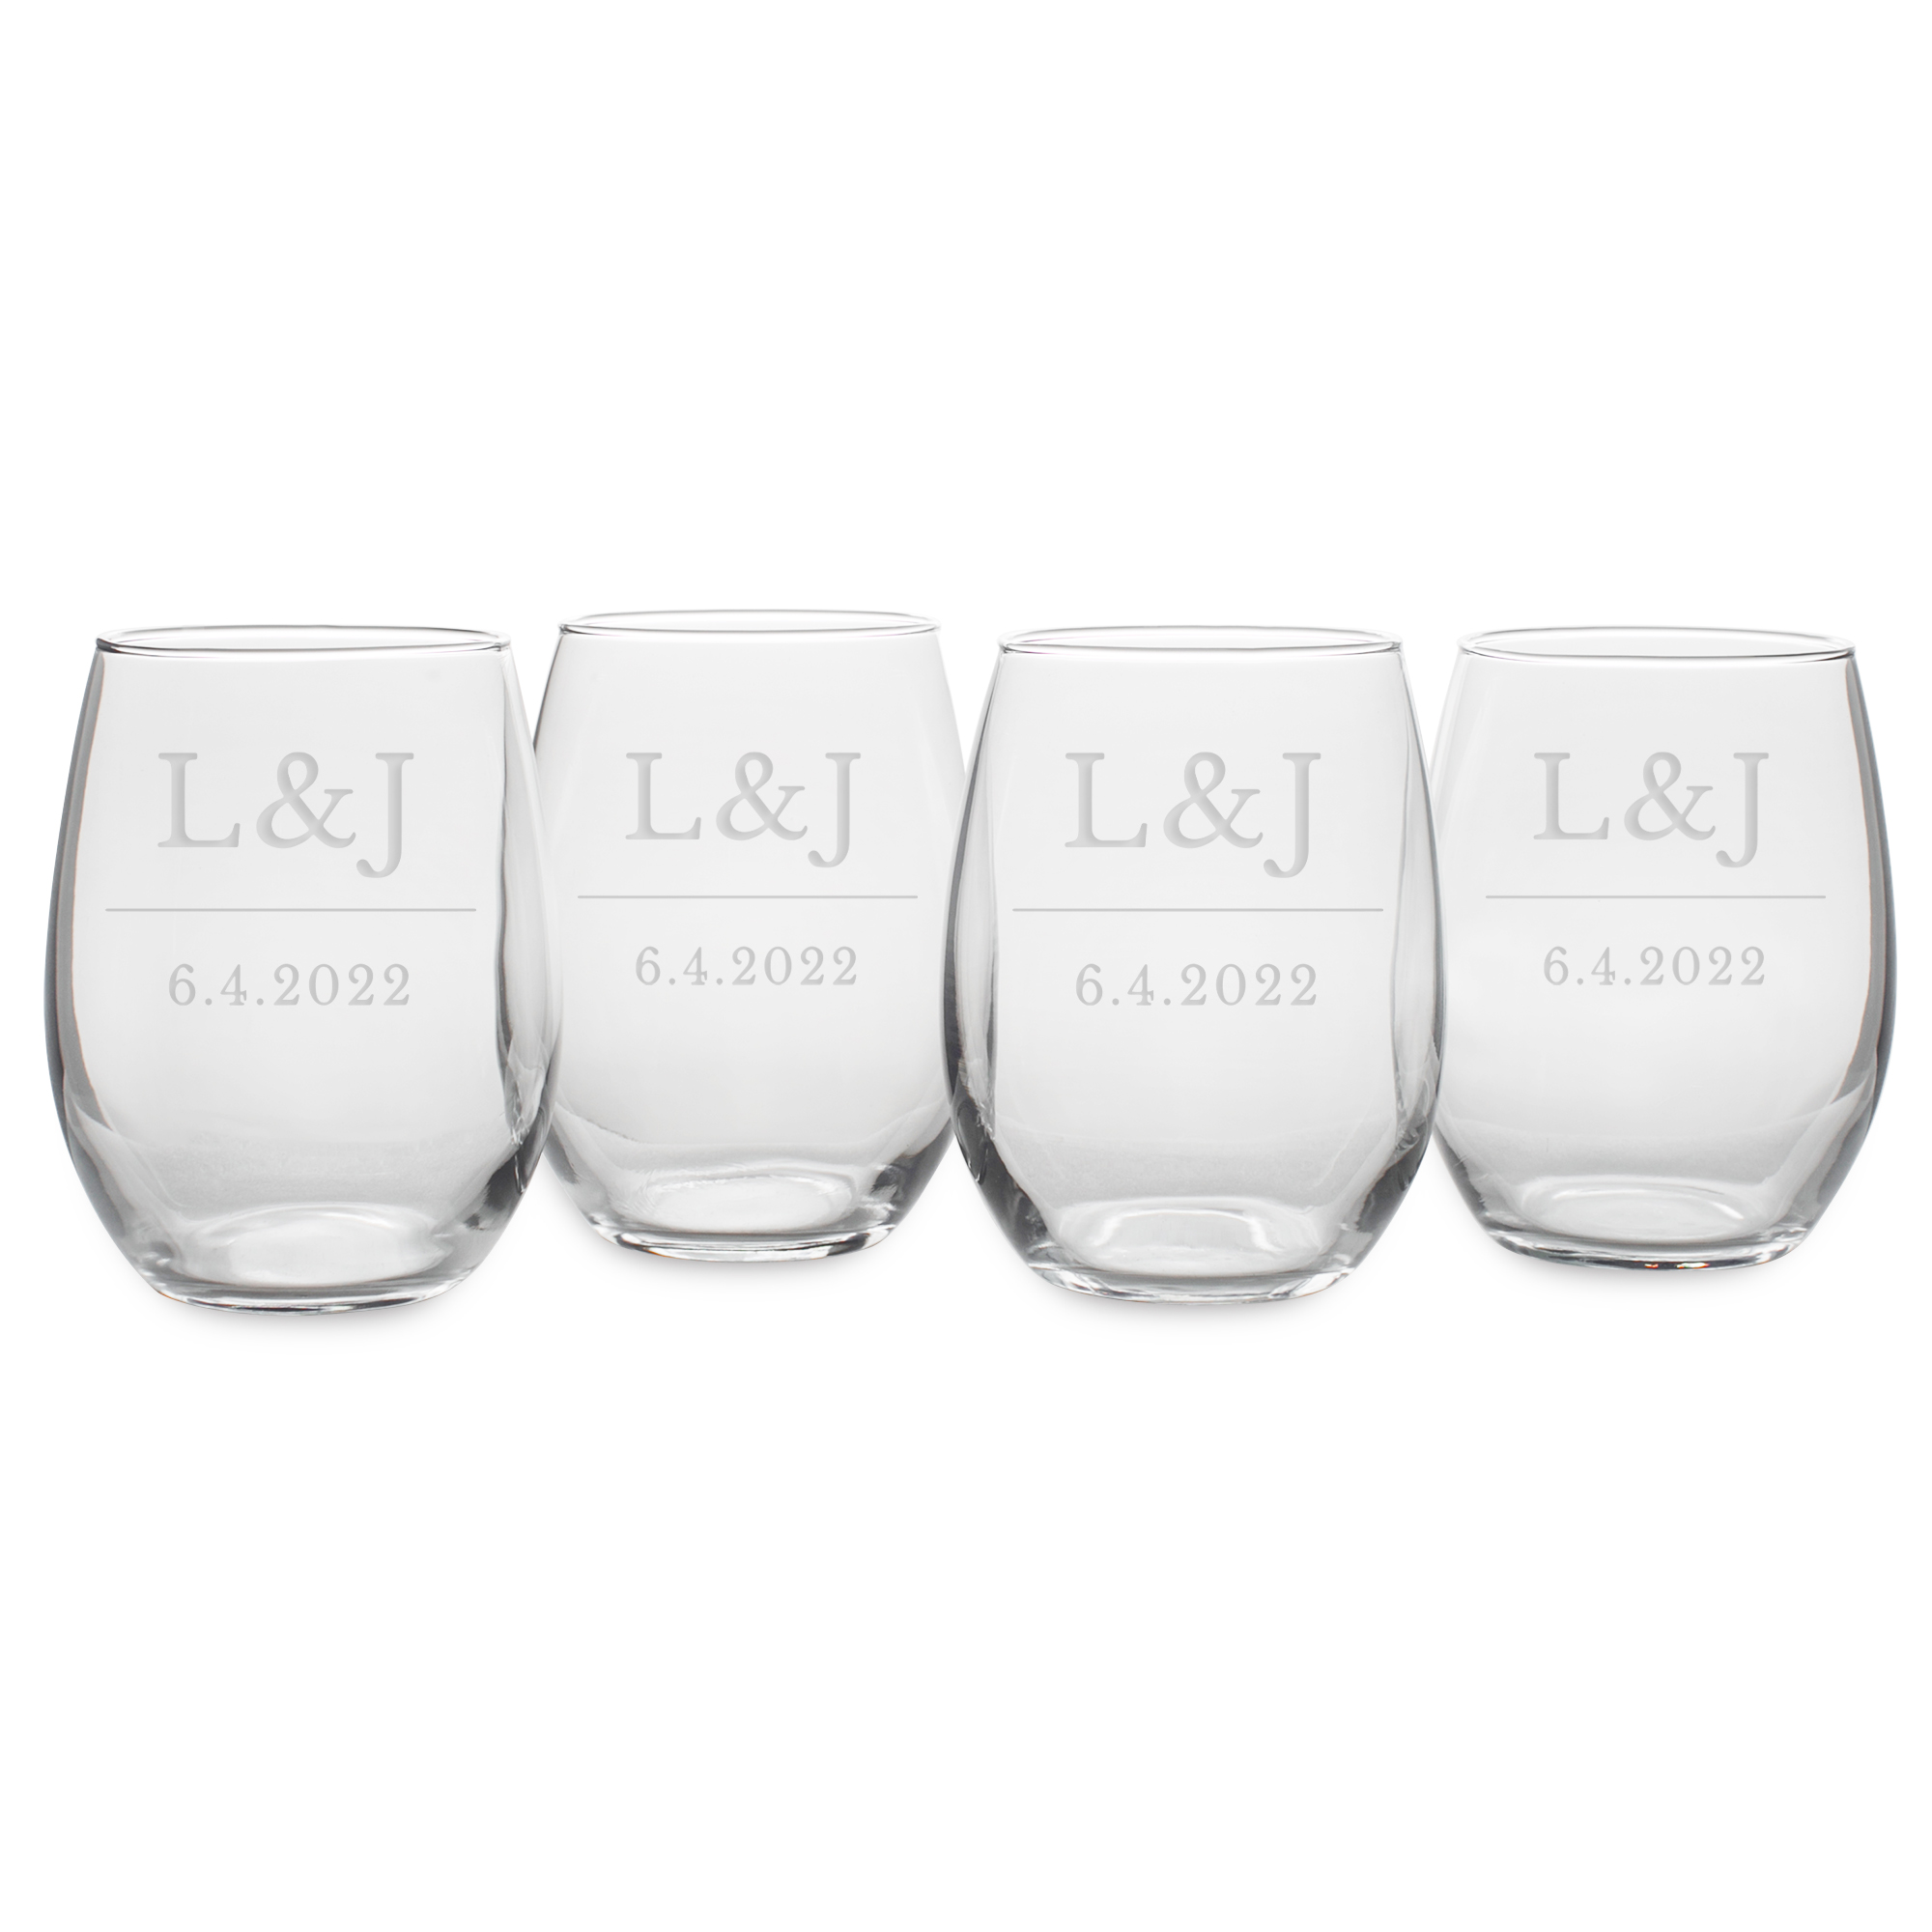 Personalized Wine Glass, Wine Glasses, Stemless Wine Glass, Engraved Glass,  Monogram Wine Glass, Wedding Gifts, Bridesmaid Gifts 